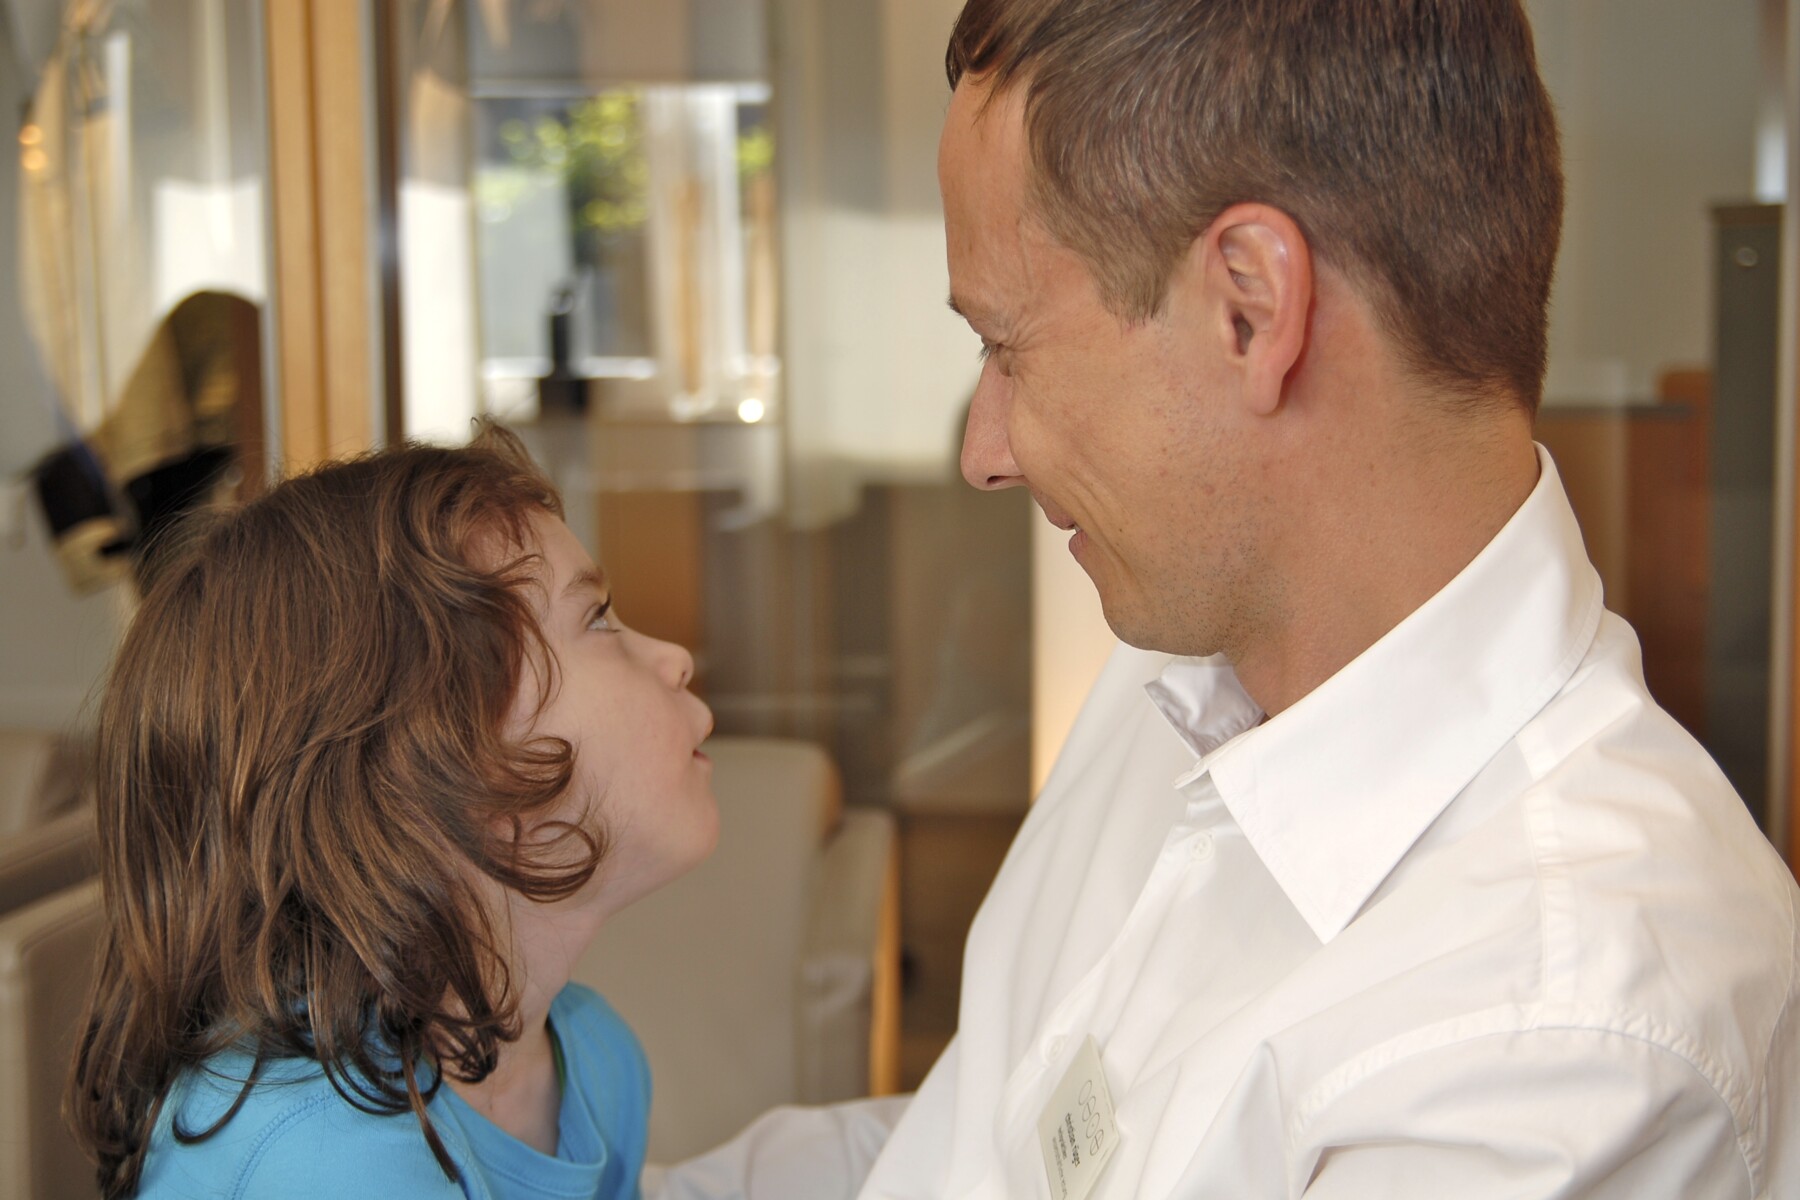 Direct, honest communication even with small patients